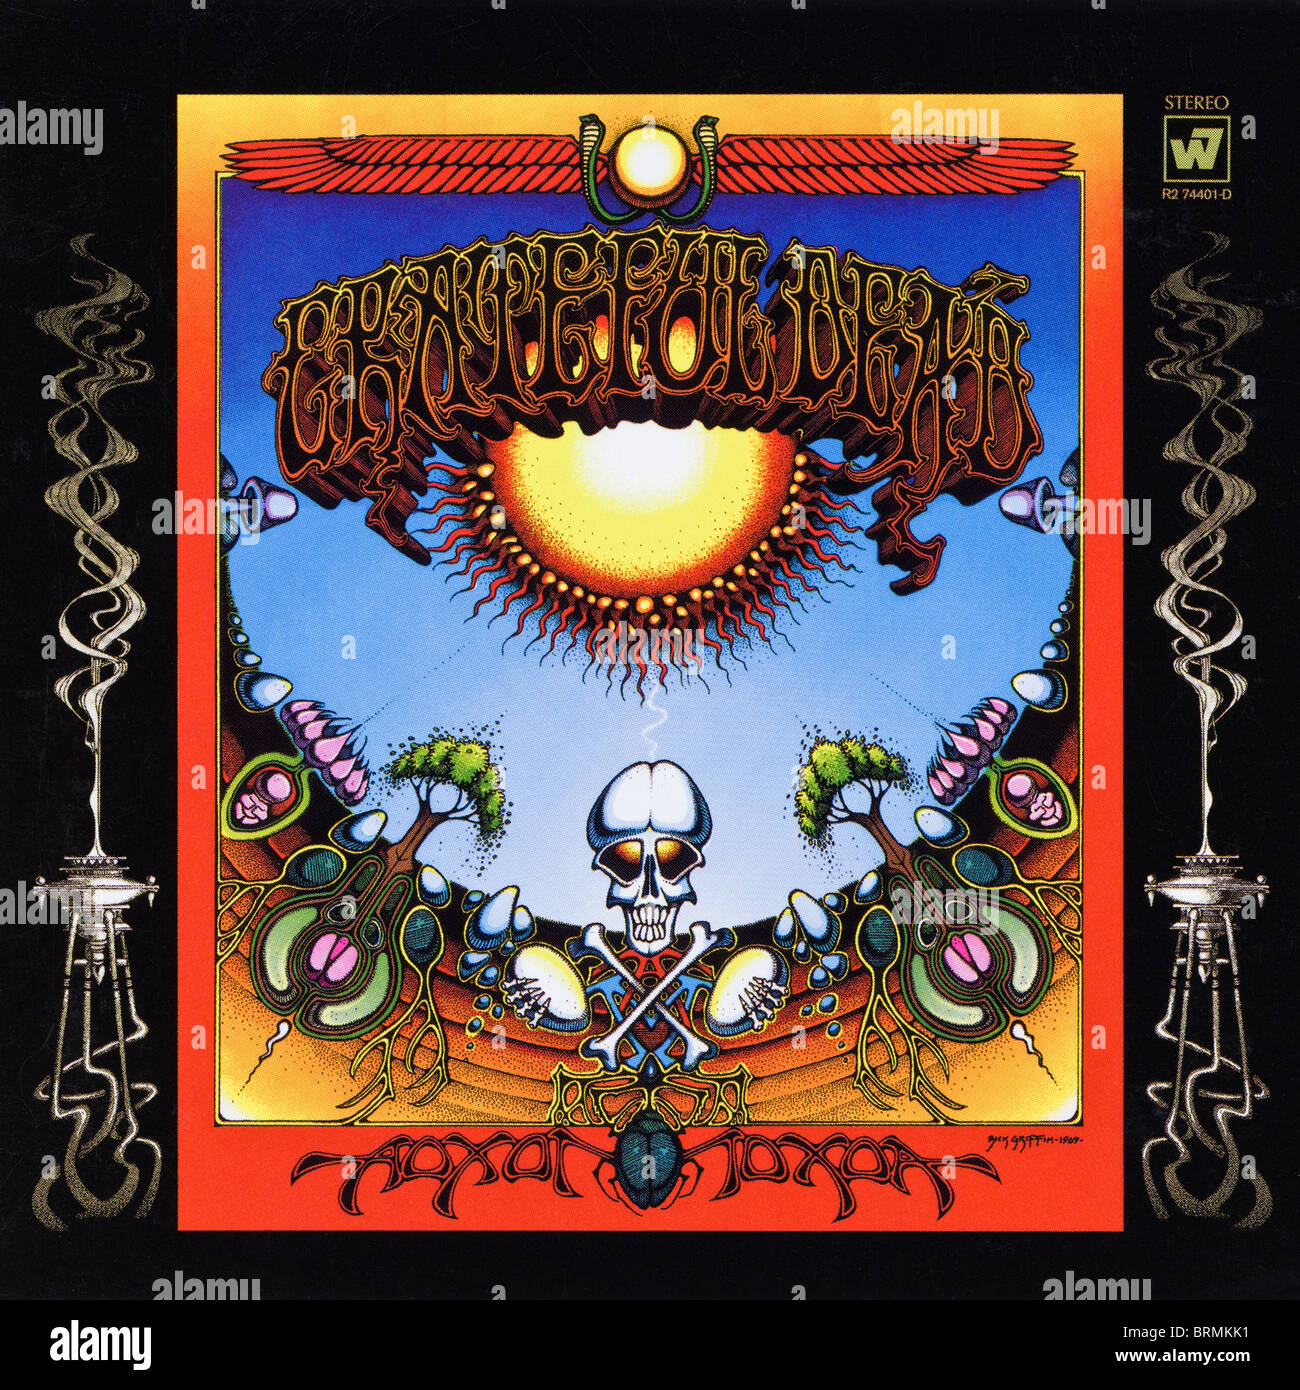 Album cover AOXOMOXOA by the Grateful Dead released 1969 by Warner Bros. Records Stock Photo